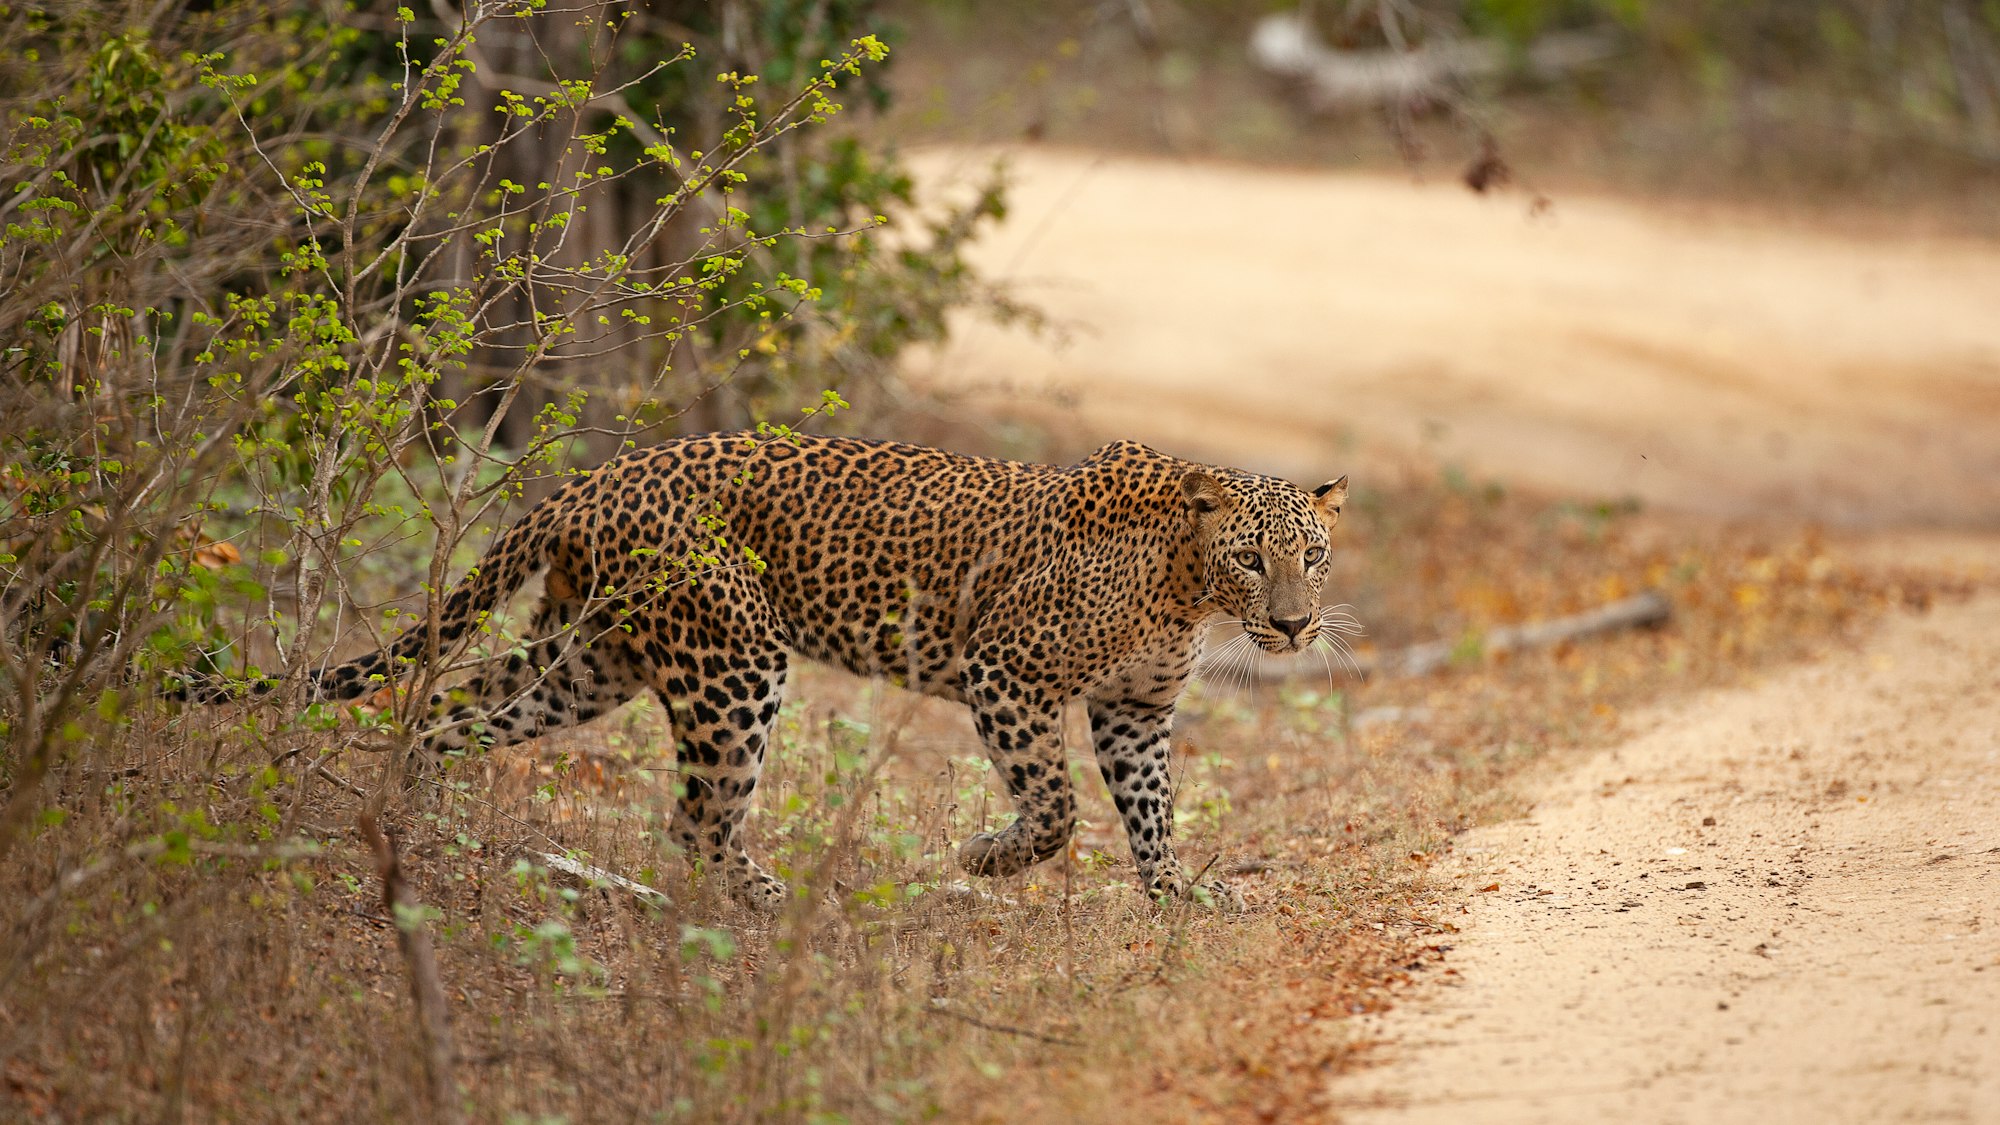 Leopard coming out from bushes